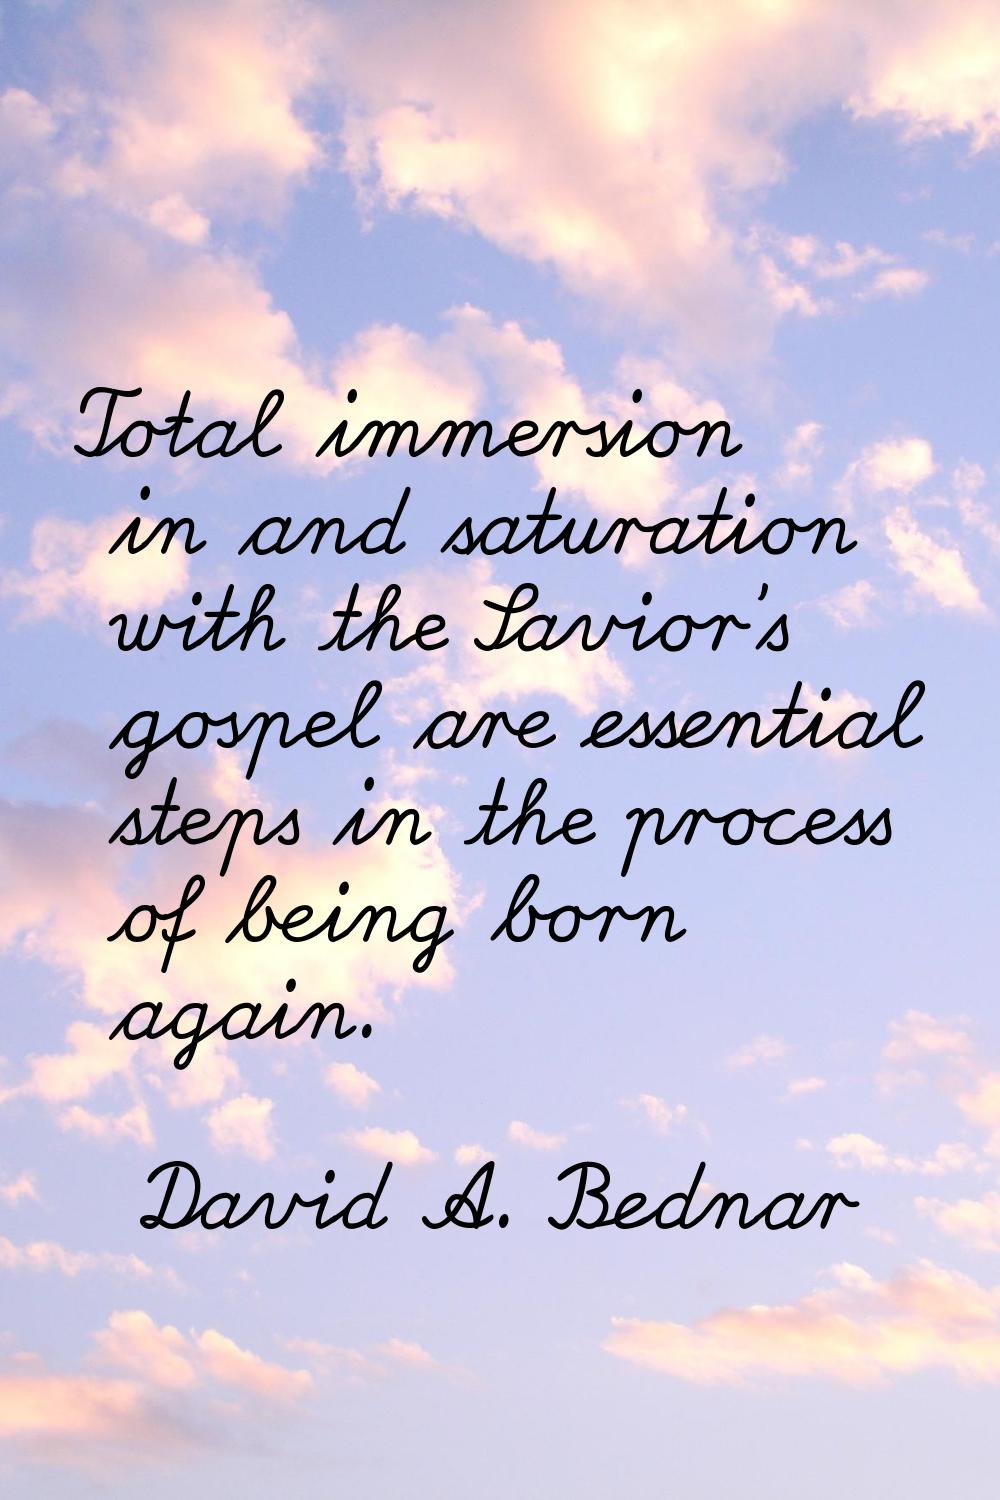 Total immersion in and saturation with the Savior's gospel are essential steps in the process of be